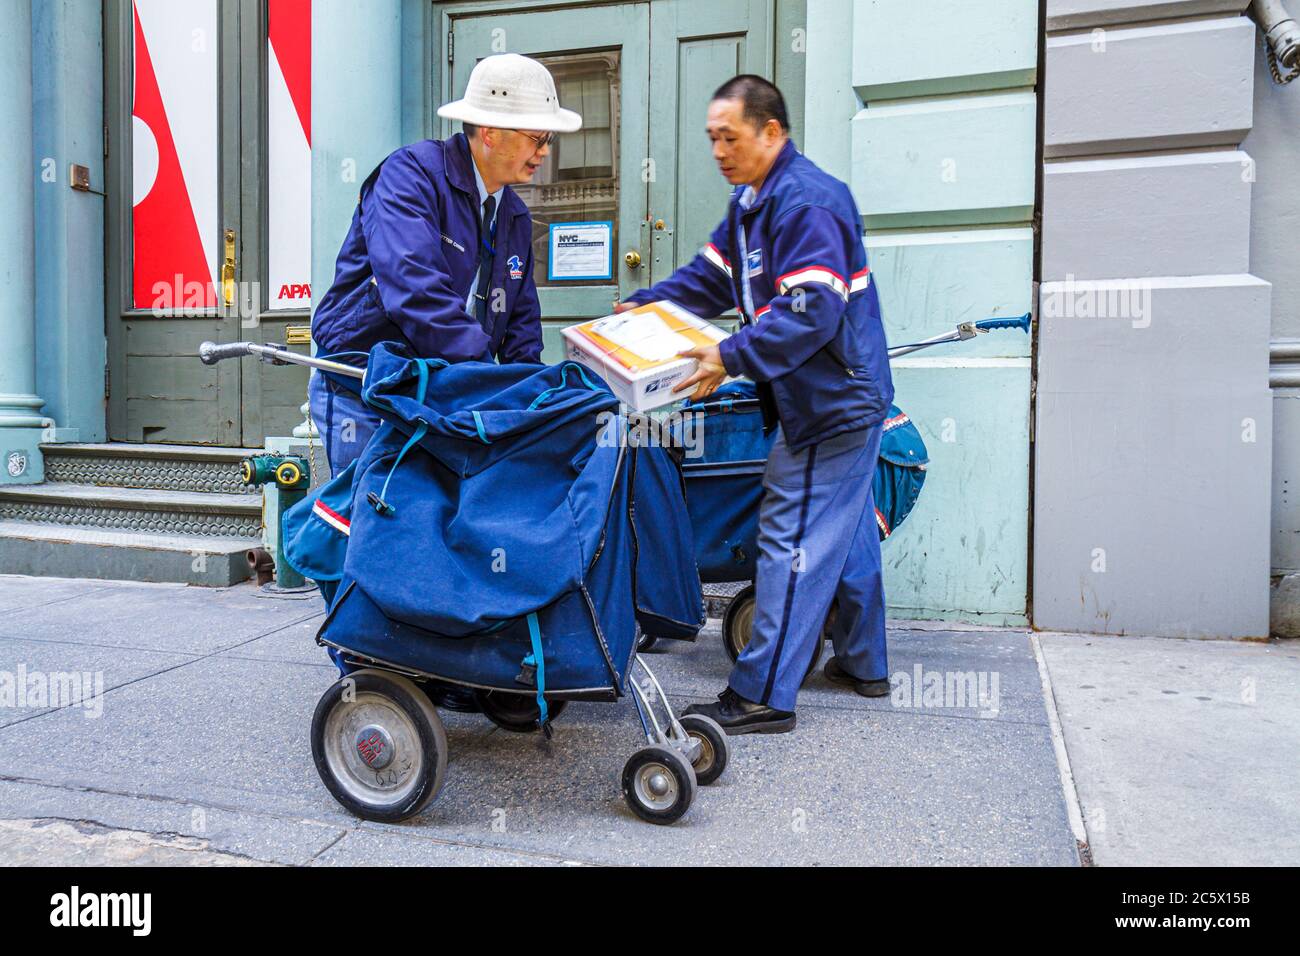 New York City,NYC NY Lower,Manhattan,SoHo,Broome Street,Asian man men male adult adults,mailman,letter carrier,postie,USPS,postal service,package,unif Stock Photo